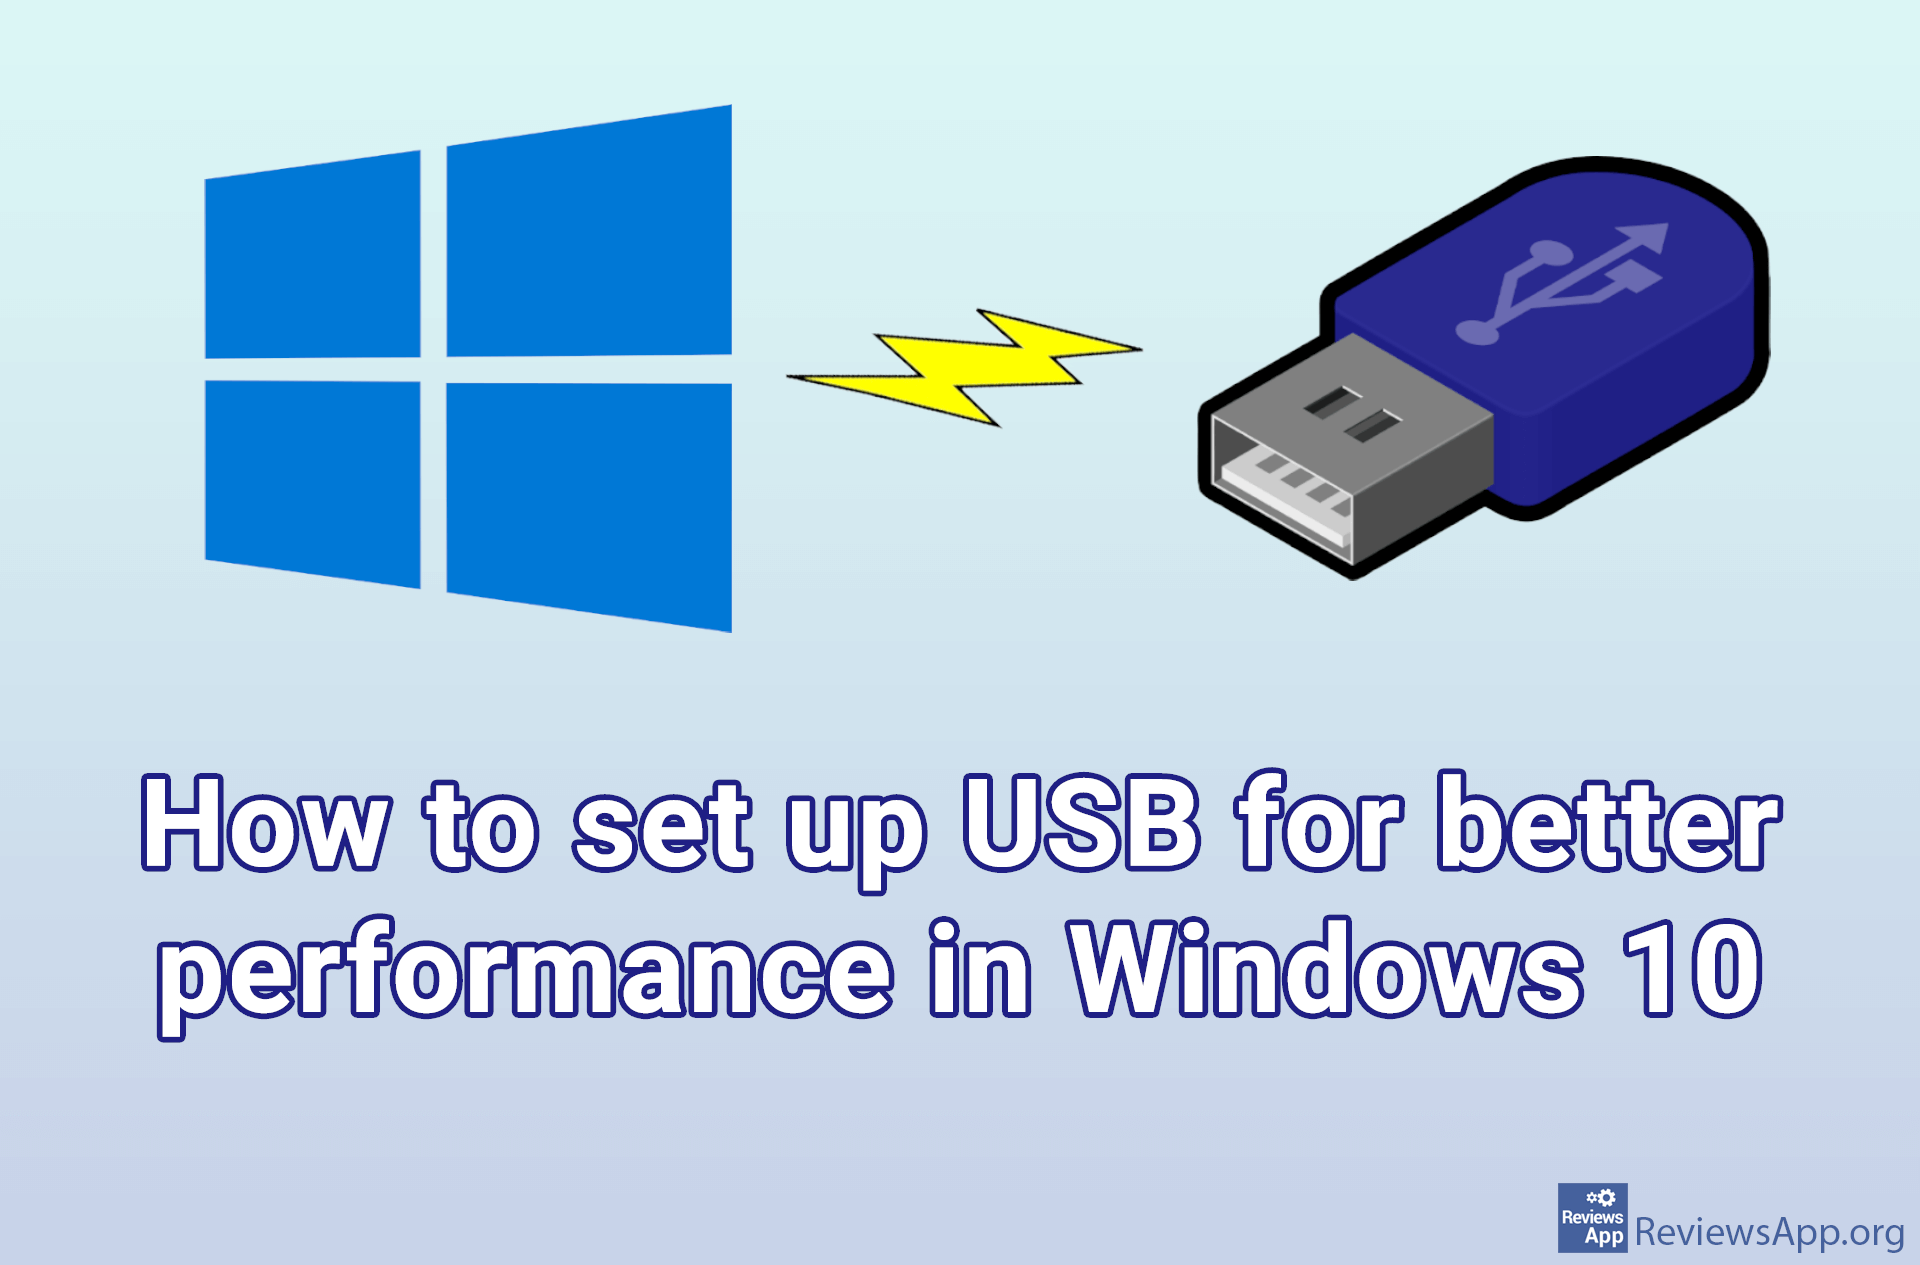 How to set up USB for better performance in Windows 10